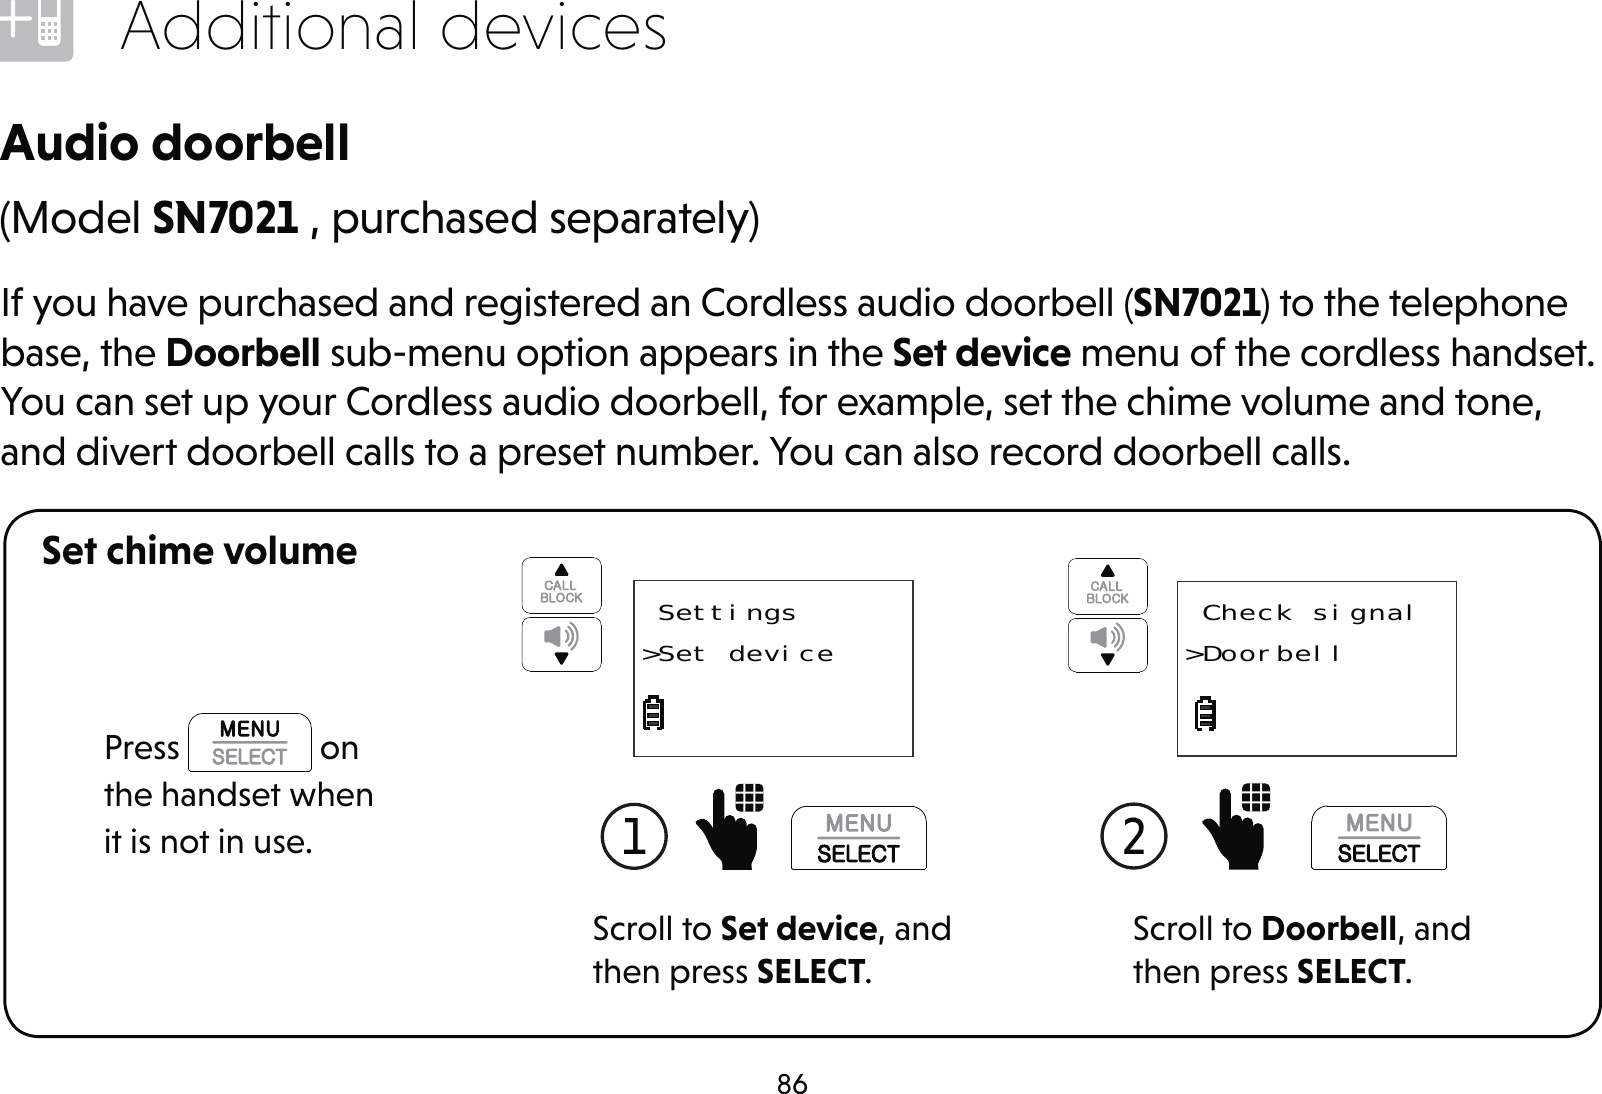 86Additional devicesIf you have purchased and registered an Cordless audio doorbell (SN7021) to the telephone base, the Doorbell sub-menu option appears in the Set device menu of the cordless handset. You can set up your Cordless audio doorbell, for example, set the chime volume and tone, and divert doorbell calls to a preset number. You can also record doorbell calls.Audio doorbellSet chime volumeScroll to Set device, and then press SELECT.1   Settings&gt;Set device(Model SN7021 , purchased separately)Scroll to Doorbell, and then press SELECT.2  Check signal&gt;DoorbellPress   on the handset when it is not in use.